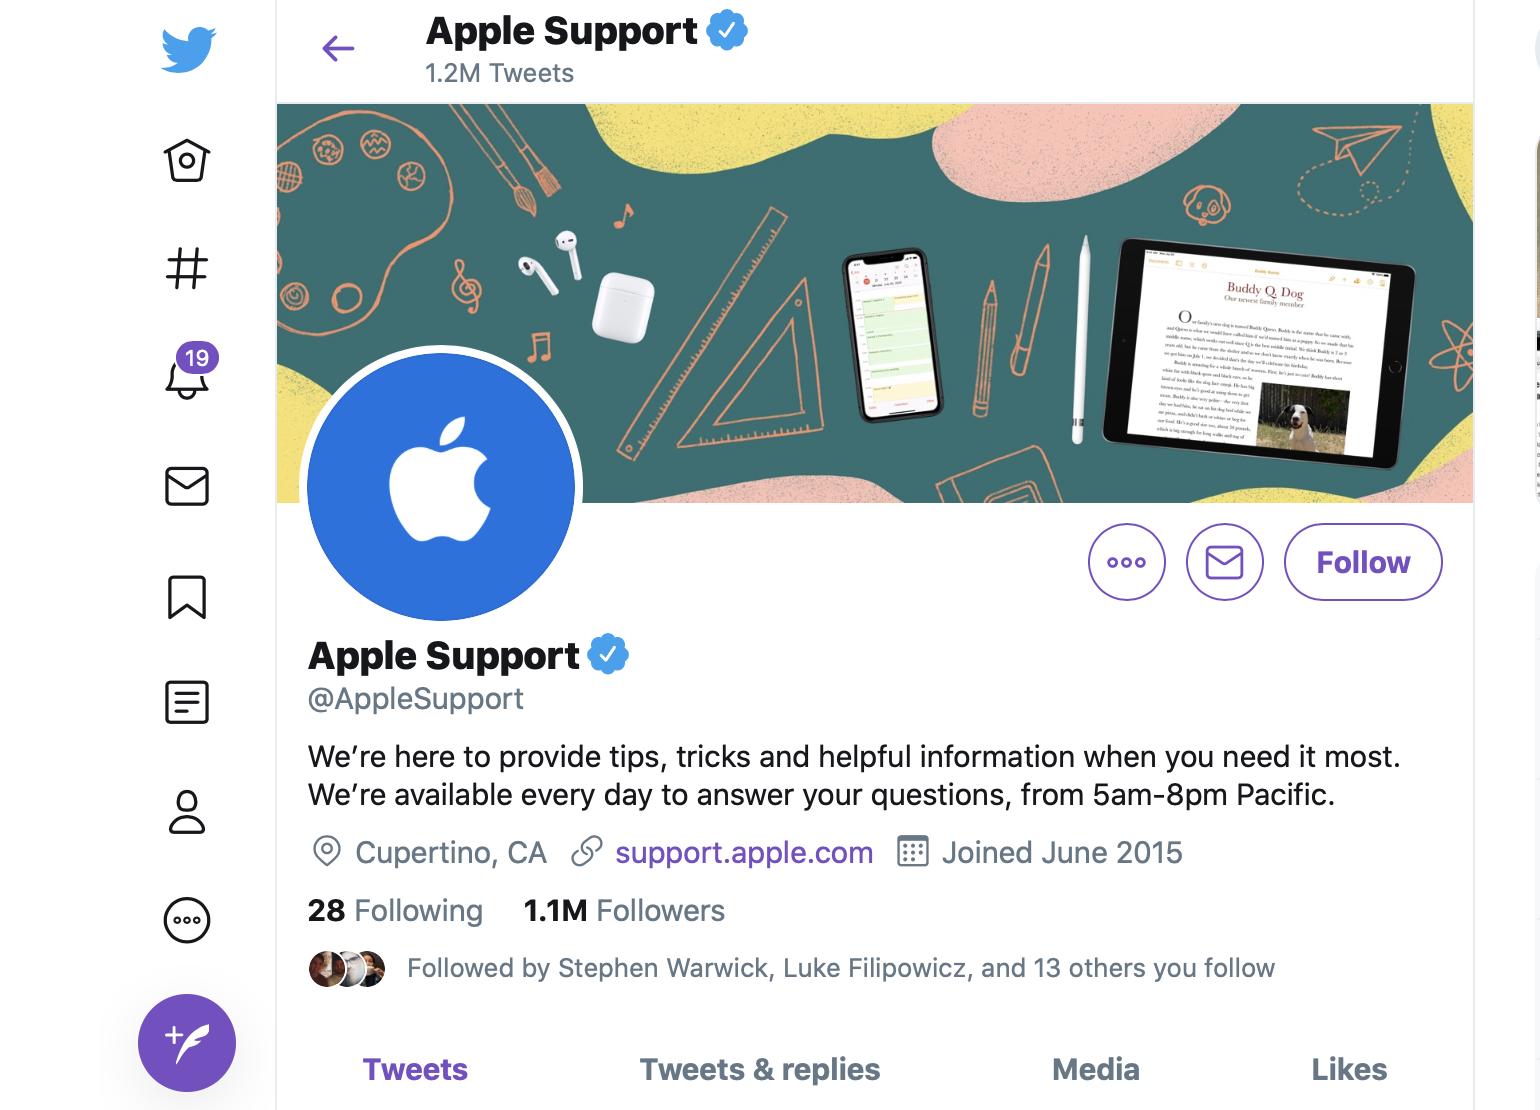 How to chat with Apple support online or on the phone: Visit Apple Support Twitter @applesupport Profile Screenshot